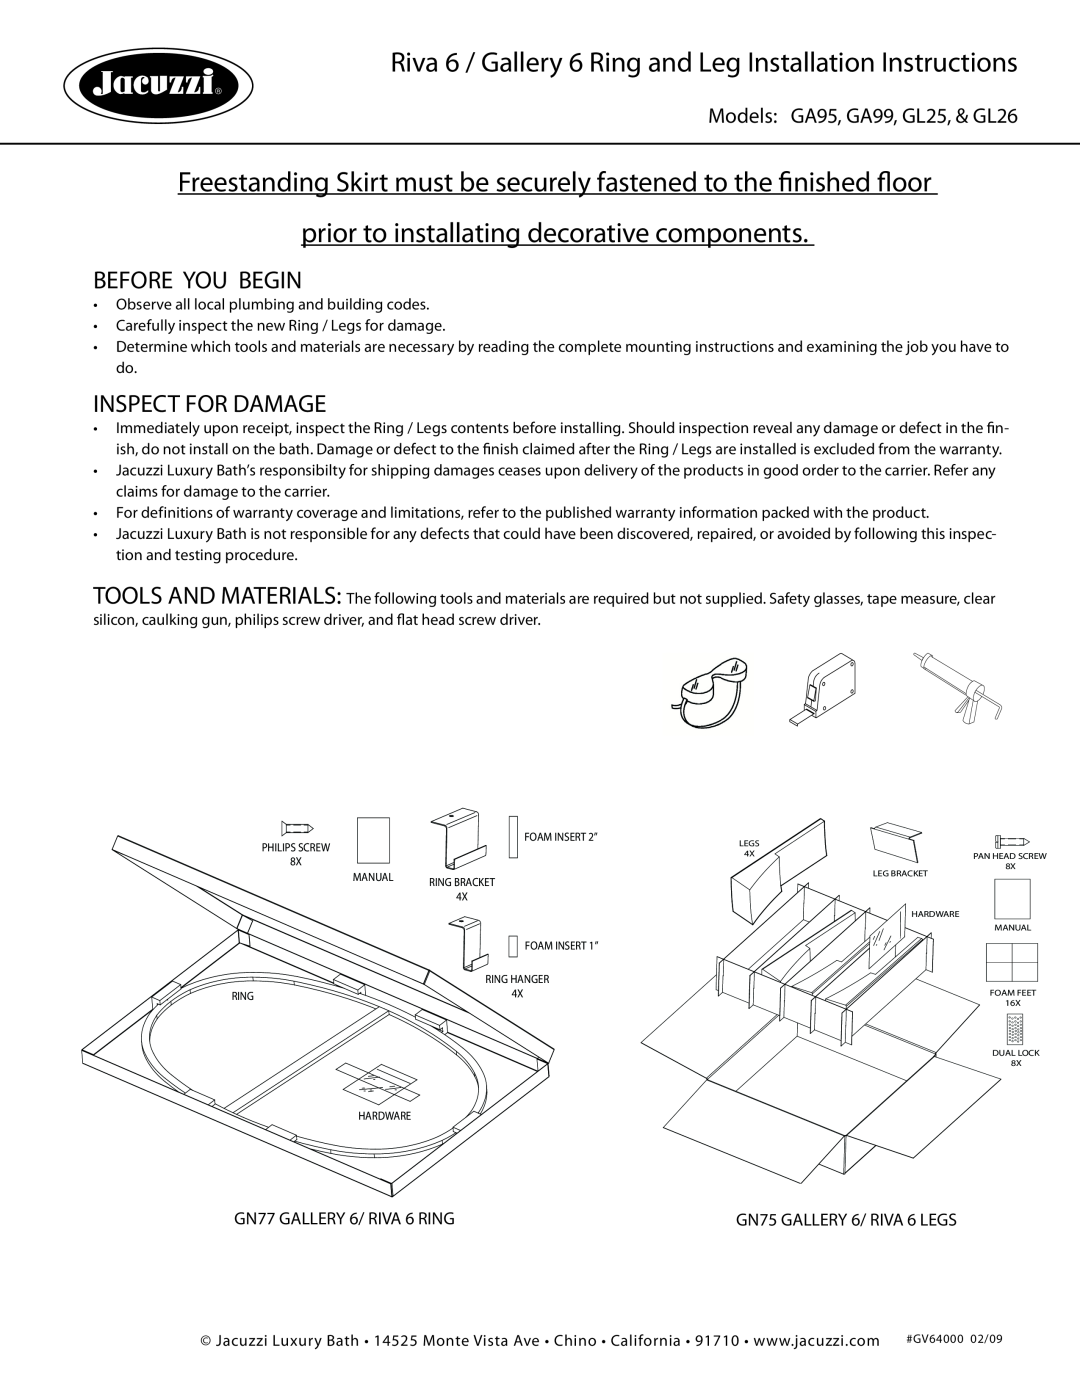 Jacuzzi GL26 installation instructions Before You Begin, Inspect For Damage, prior to installating decorative components 